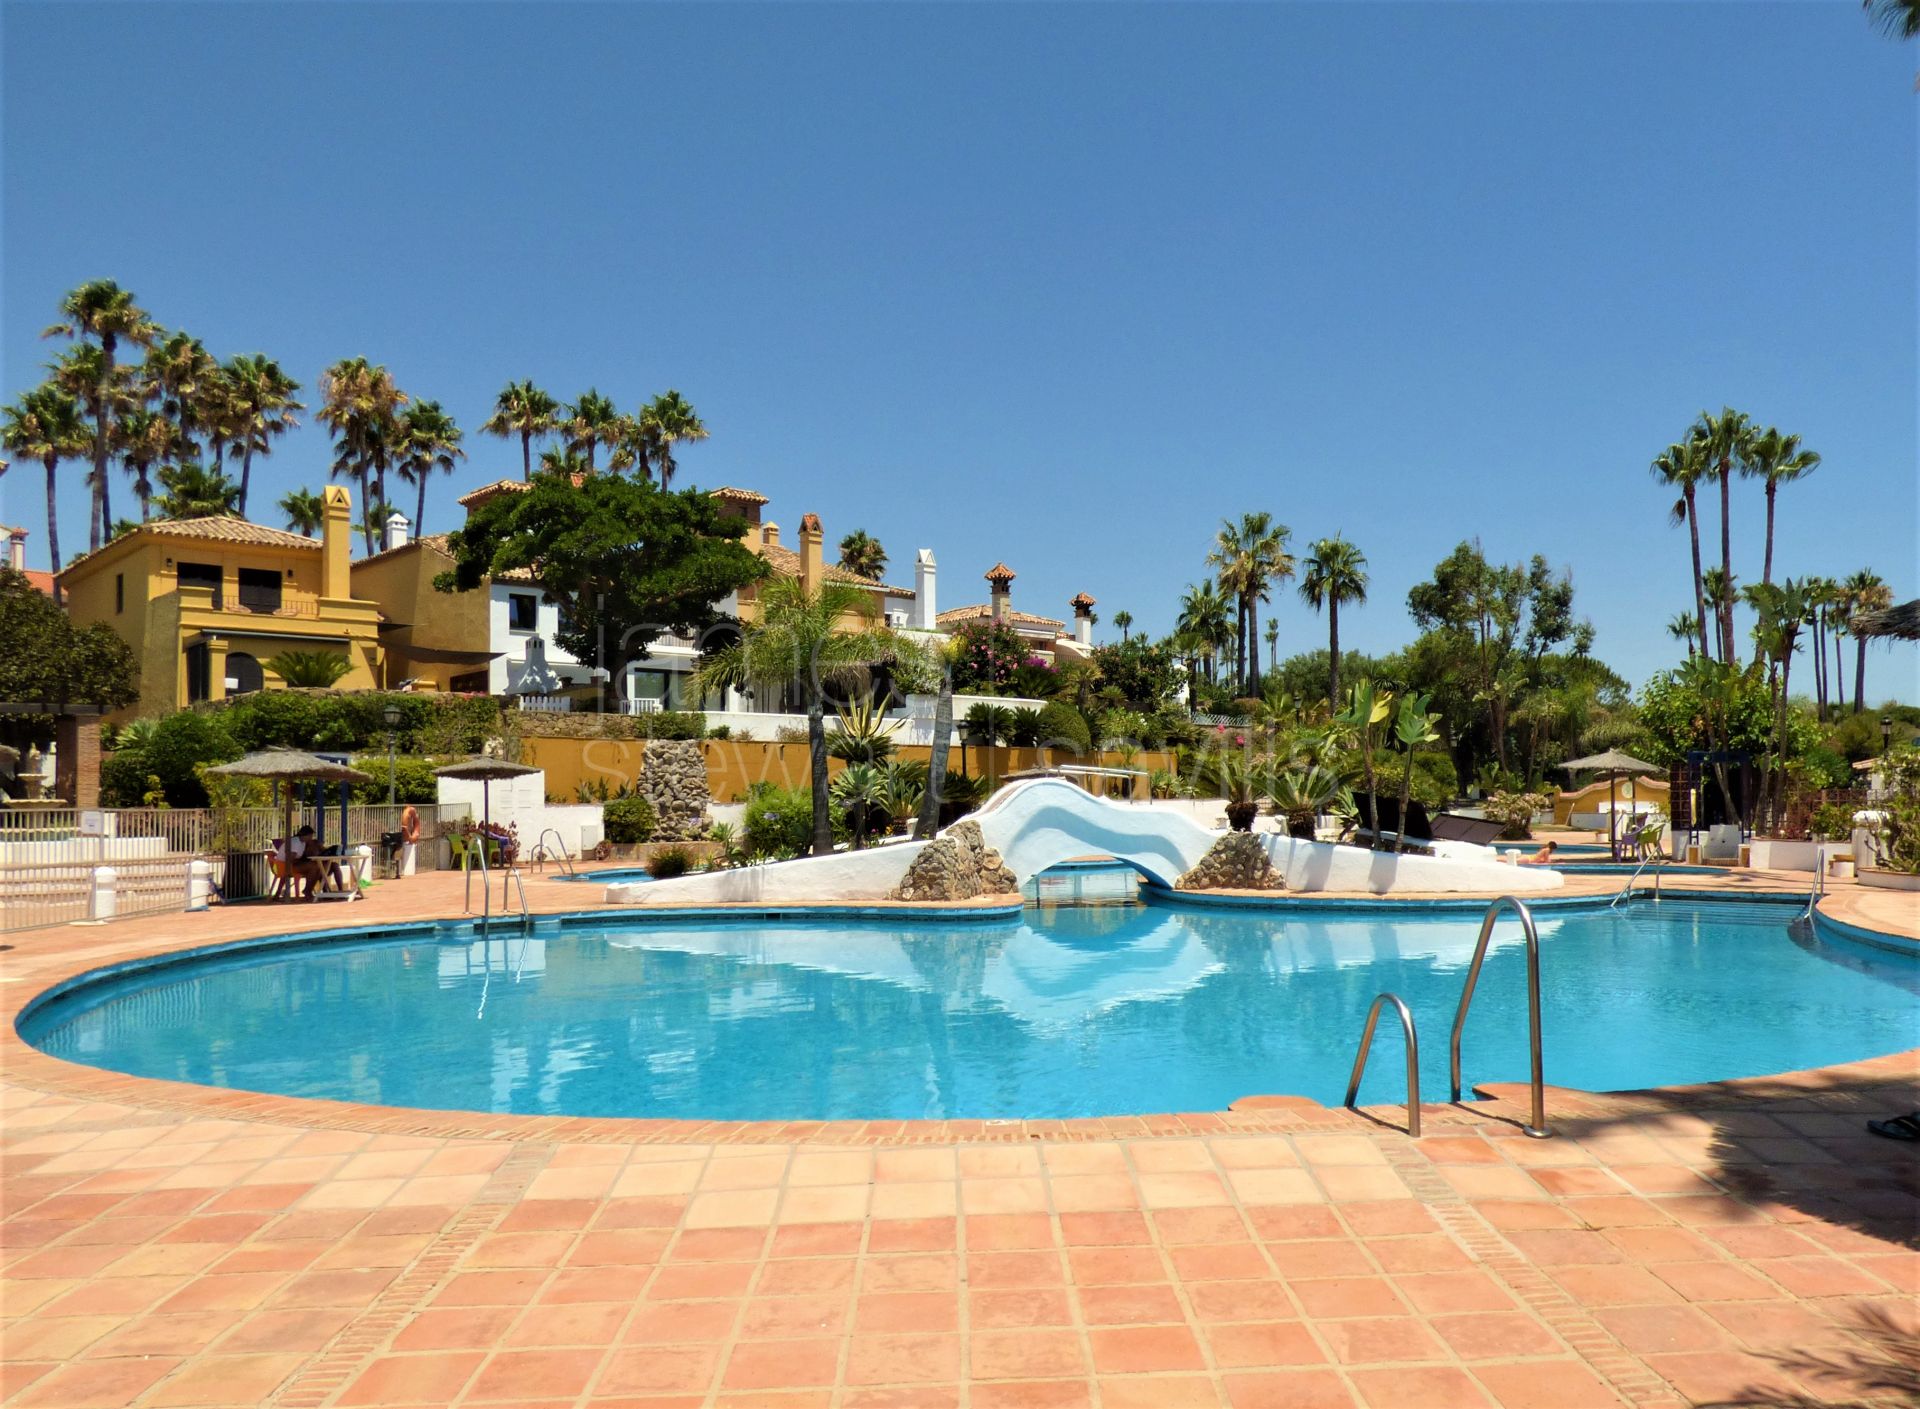 Townhouse in Alcaidesa only 35m from the beach!